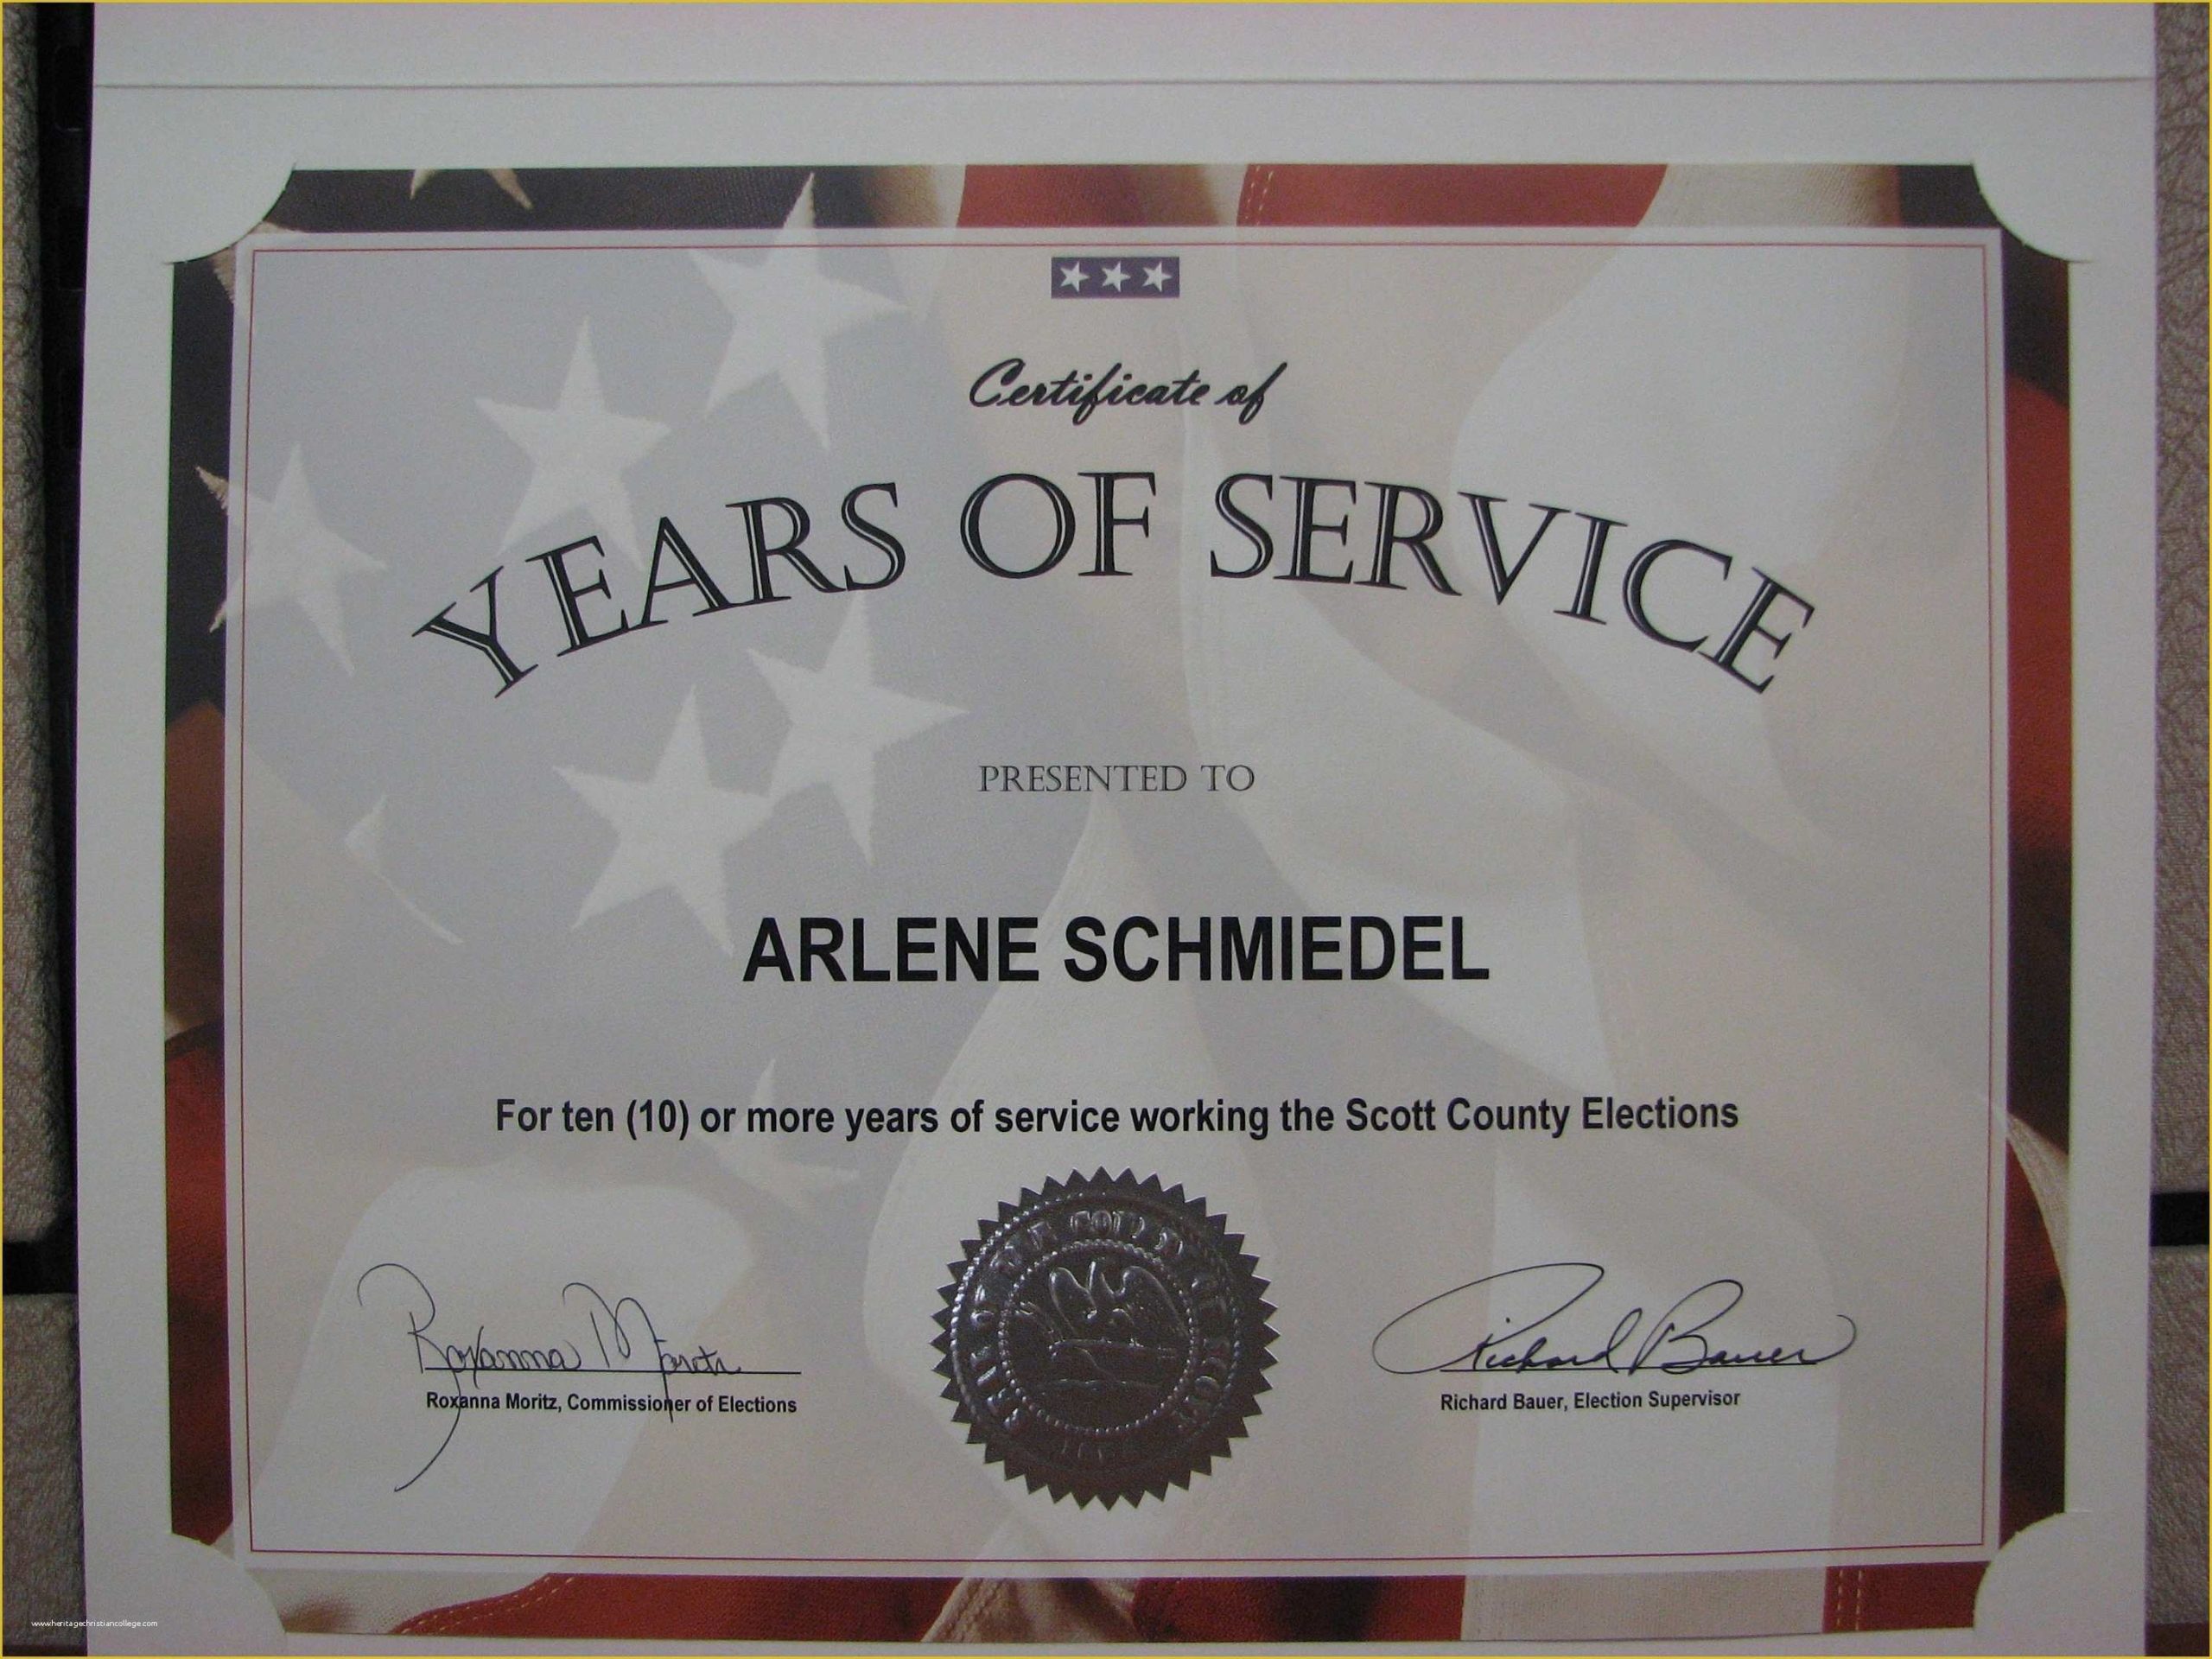 Years Of Service Certificate Template Free Of August 2011 regarding Certificate For Years Of Service Template